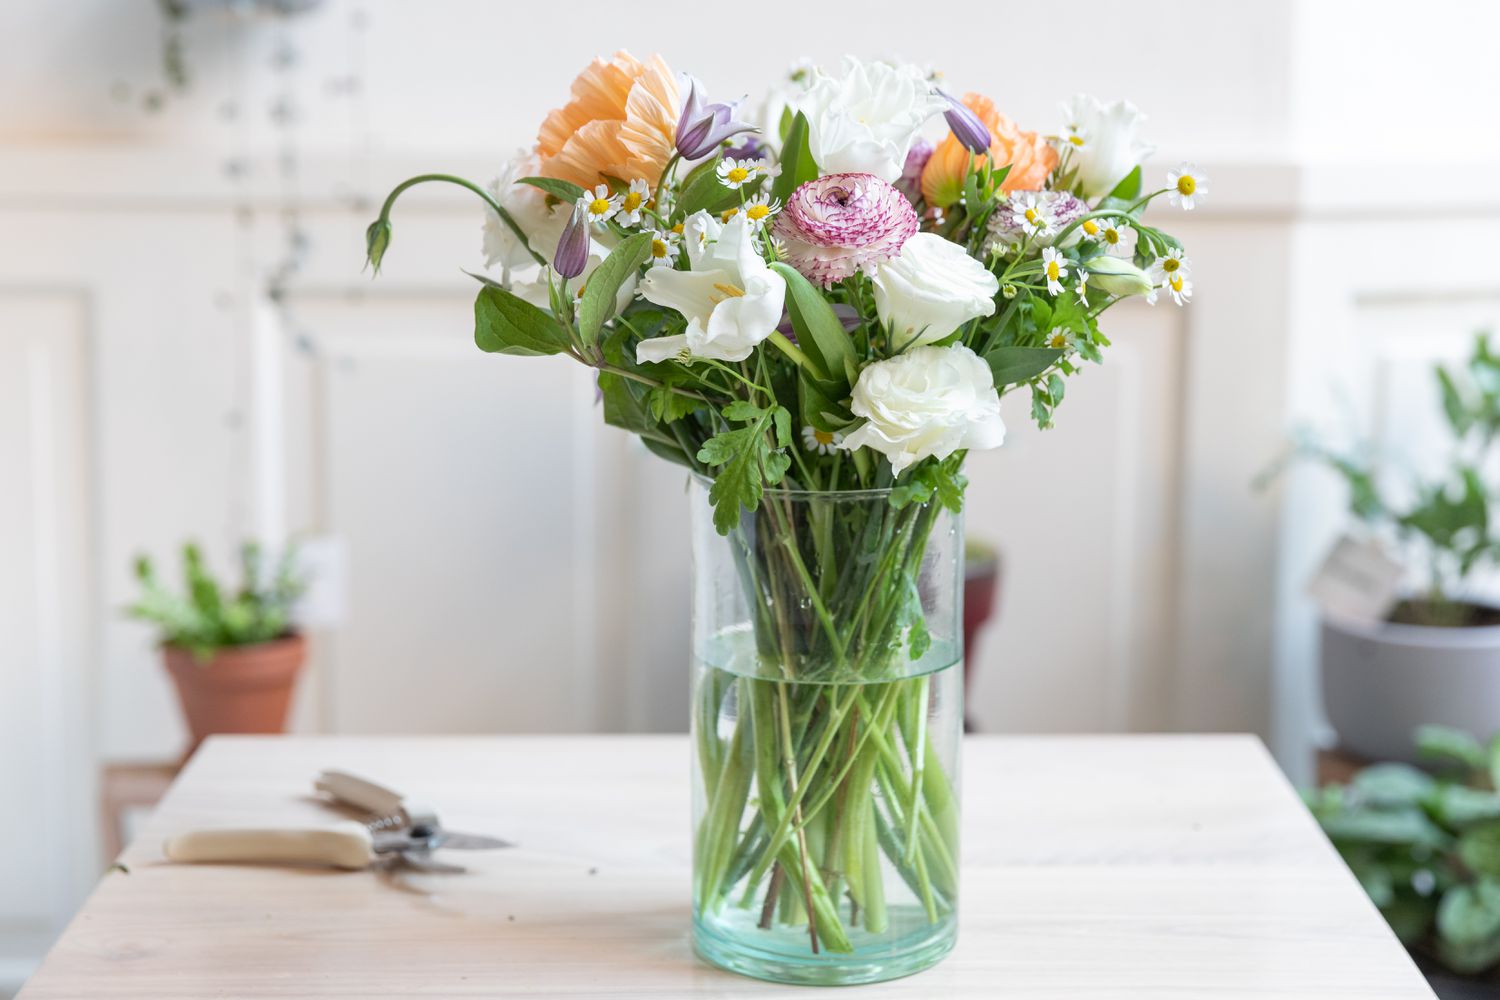 How To Store Cut Flowers